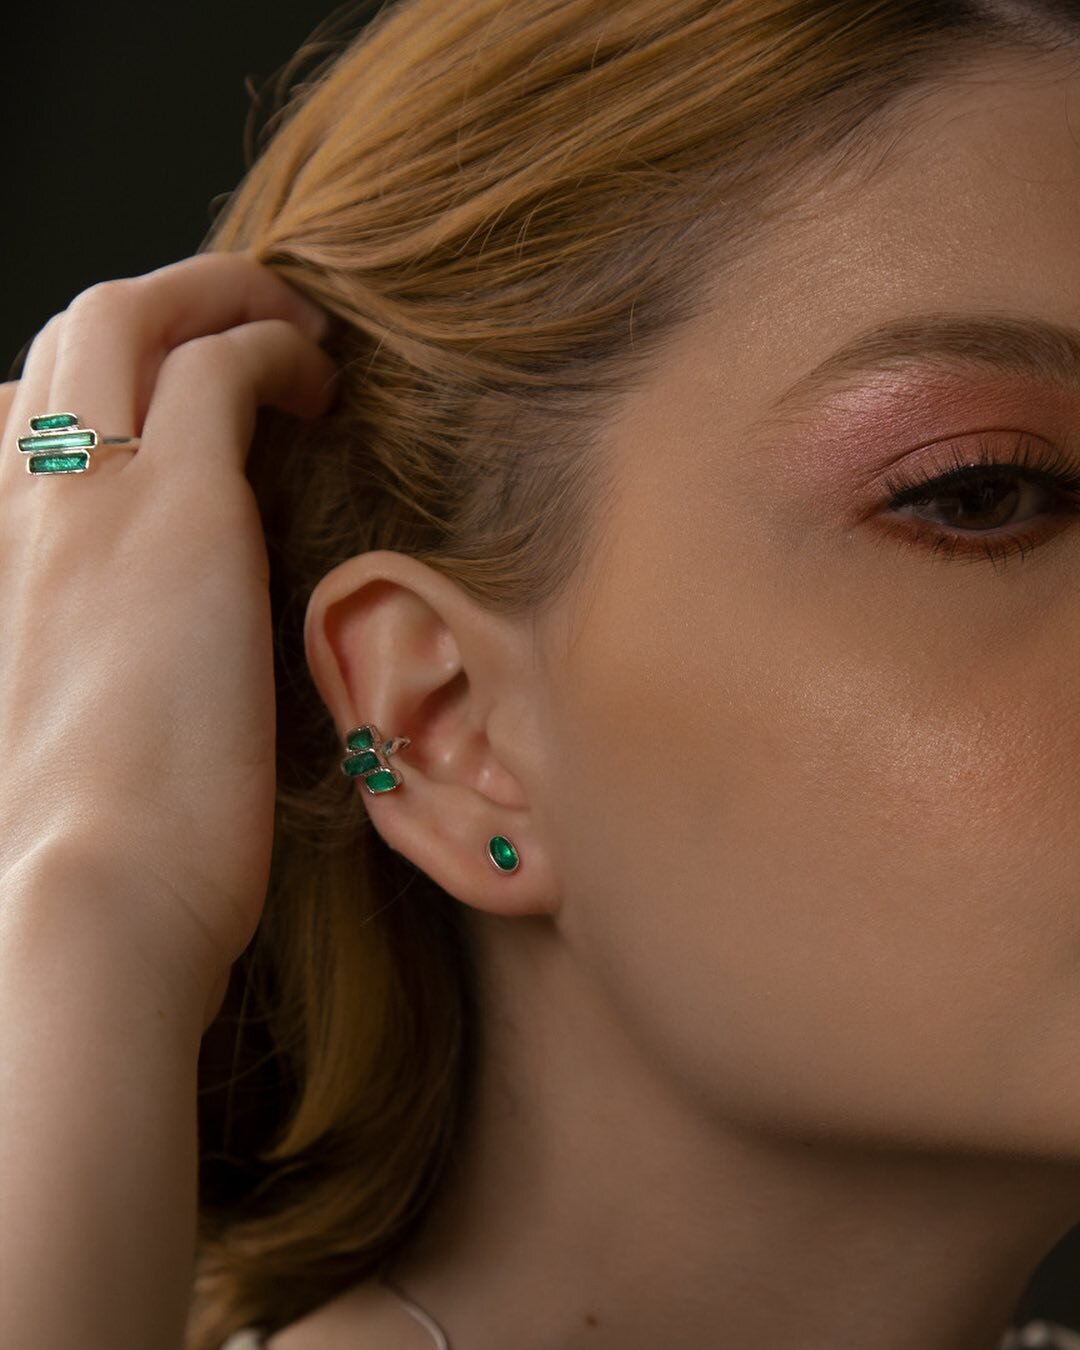 I don&rsquo;t need a caption for this. 
A wow and a sight are enough. 
She is @thekittydrunk and @mostterhenry was behind the lens 
Would you wear emerald jewelry?
Leave a comment!

.
Posted from @feedpreview.official 🙈!

#earcuff #earcuffs #earcuff